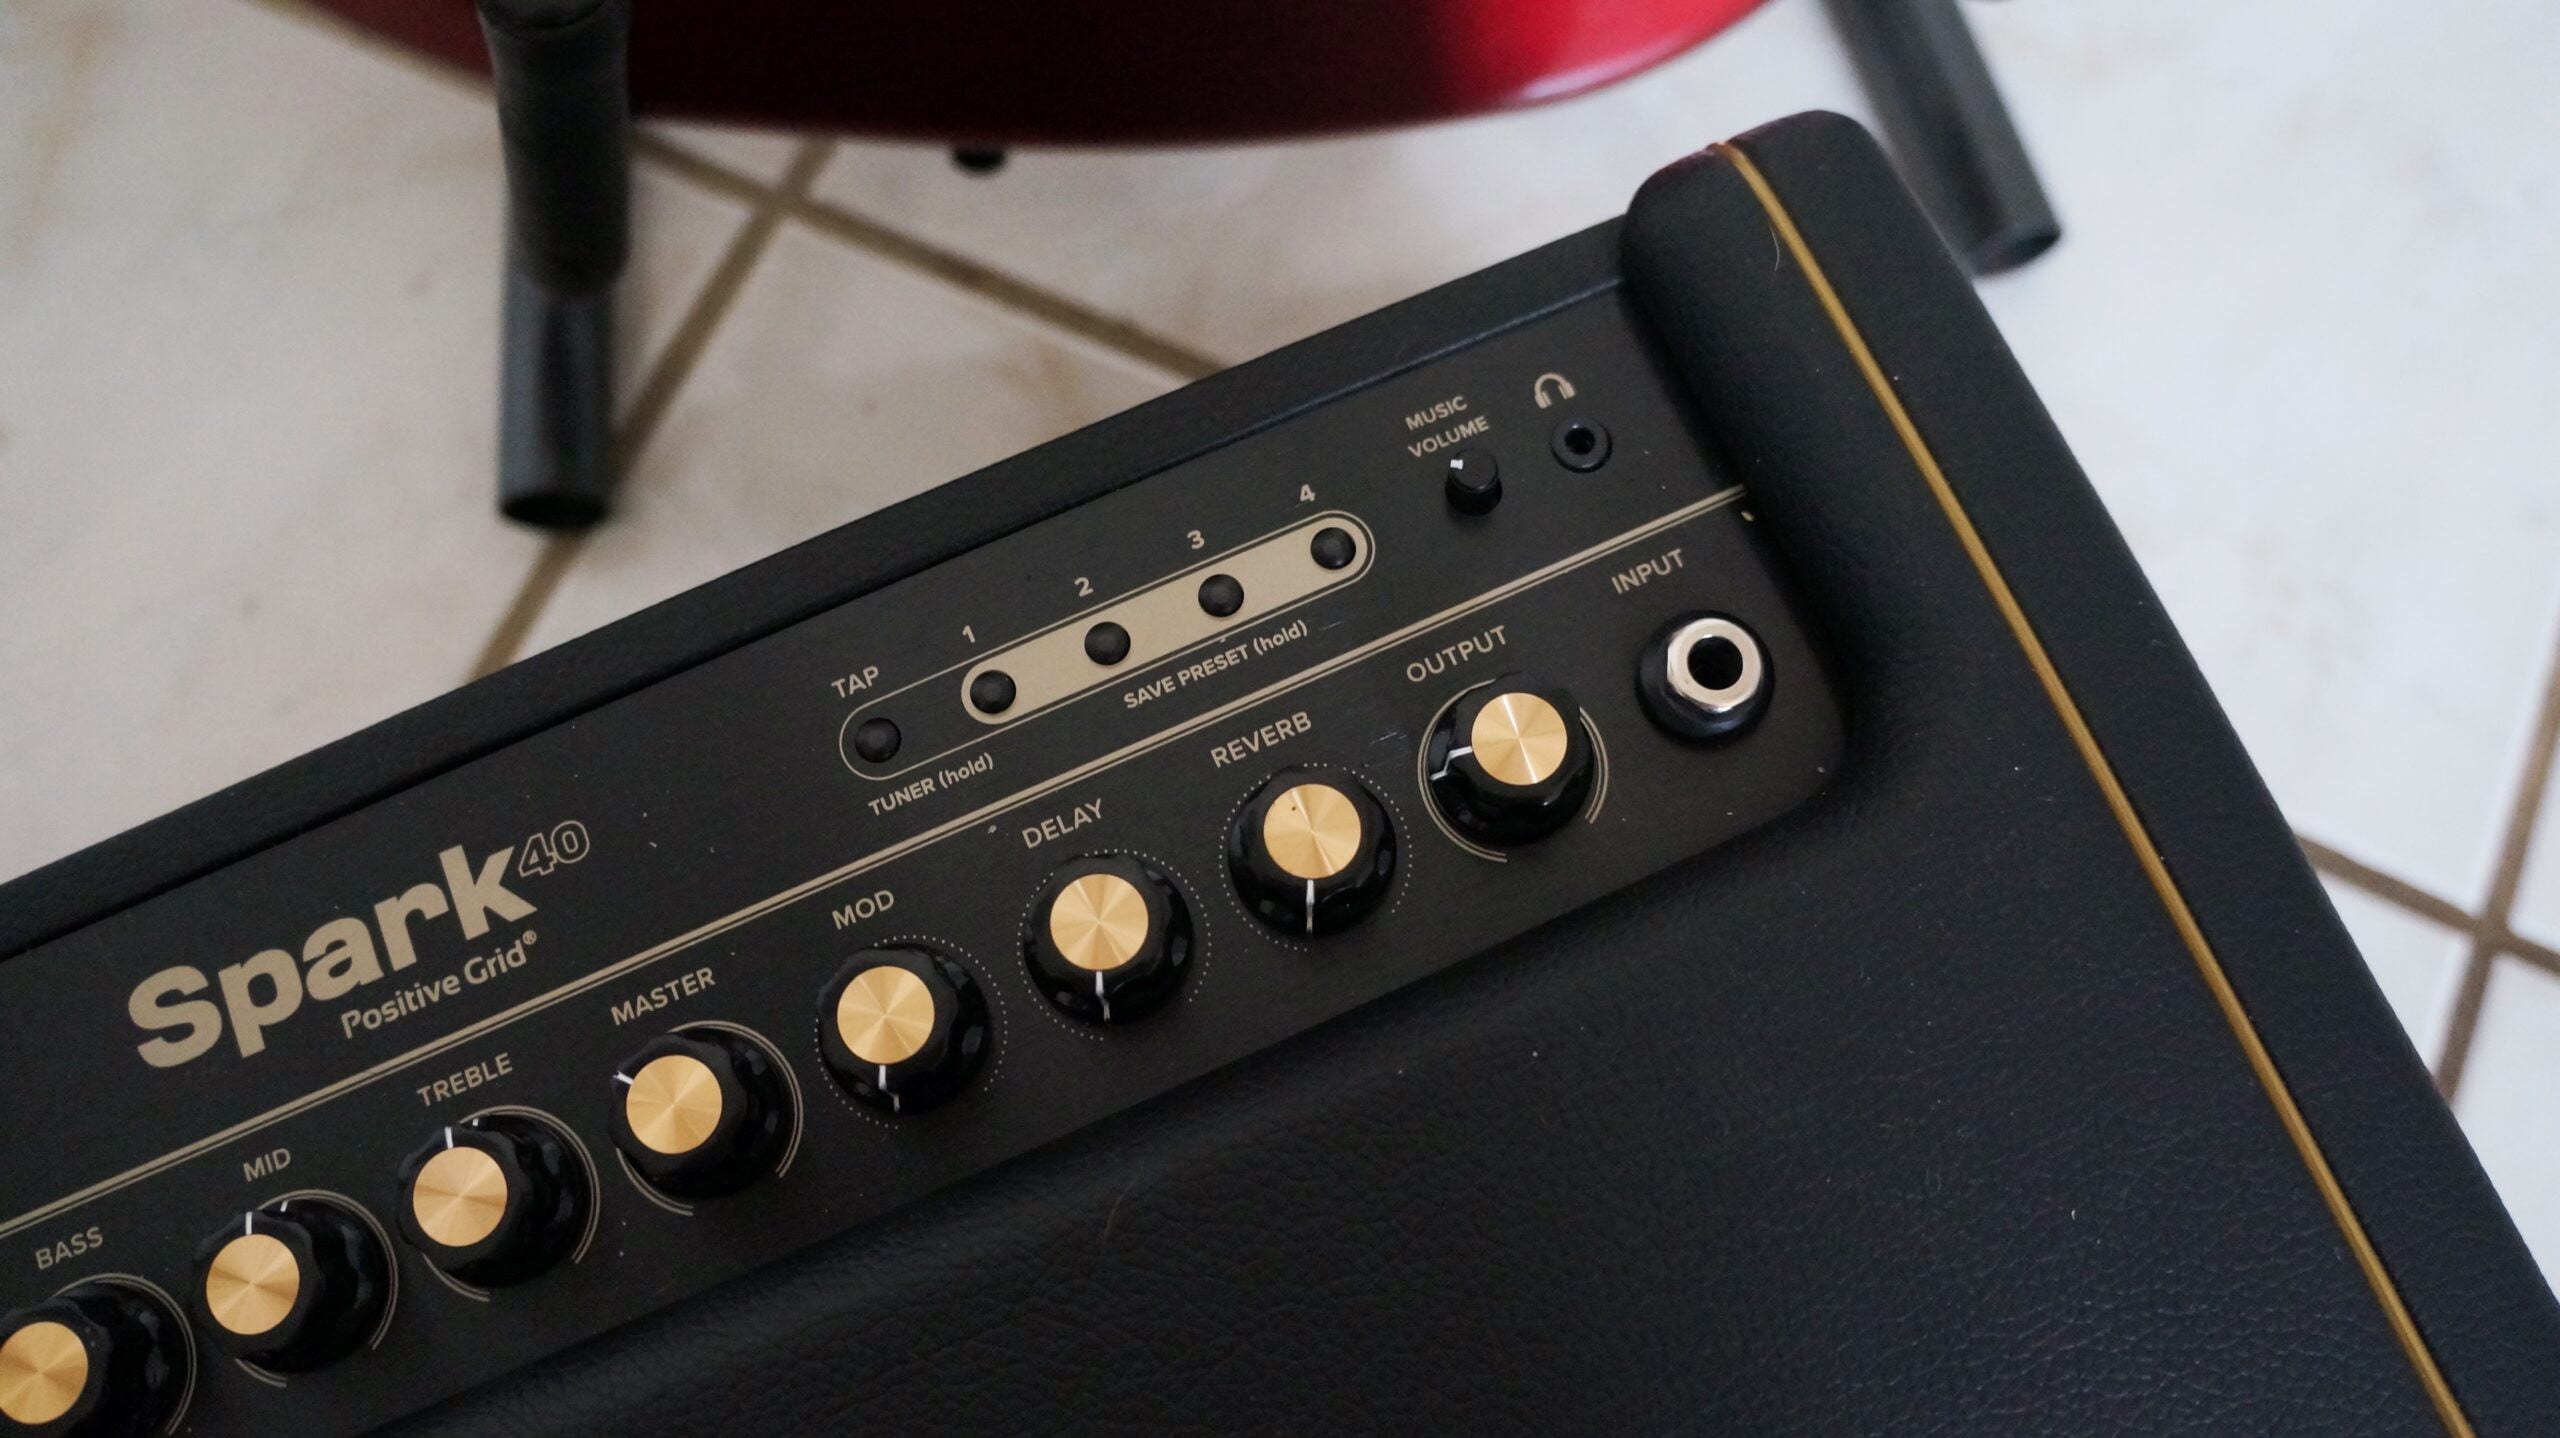 Positive Grid Spark Guitar Amp Review | Trusted Reviews